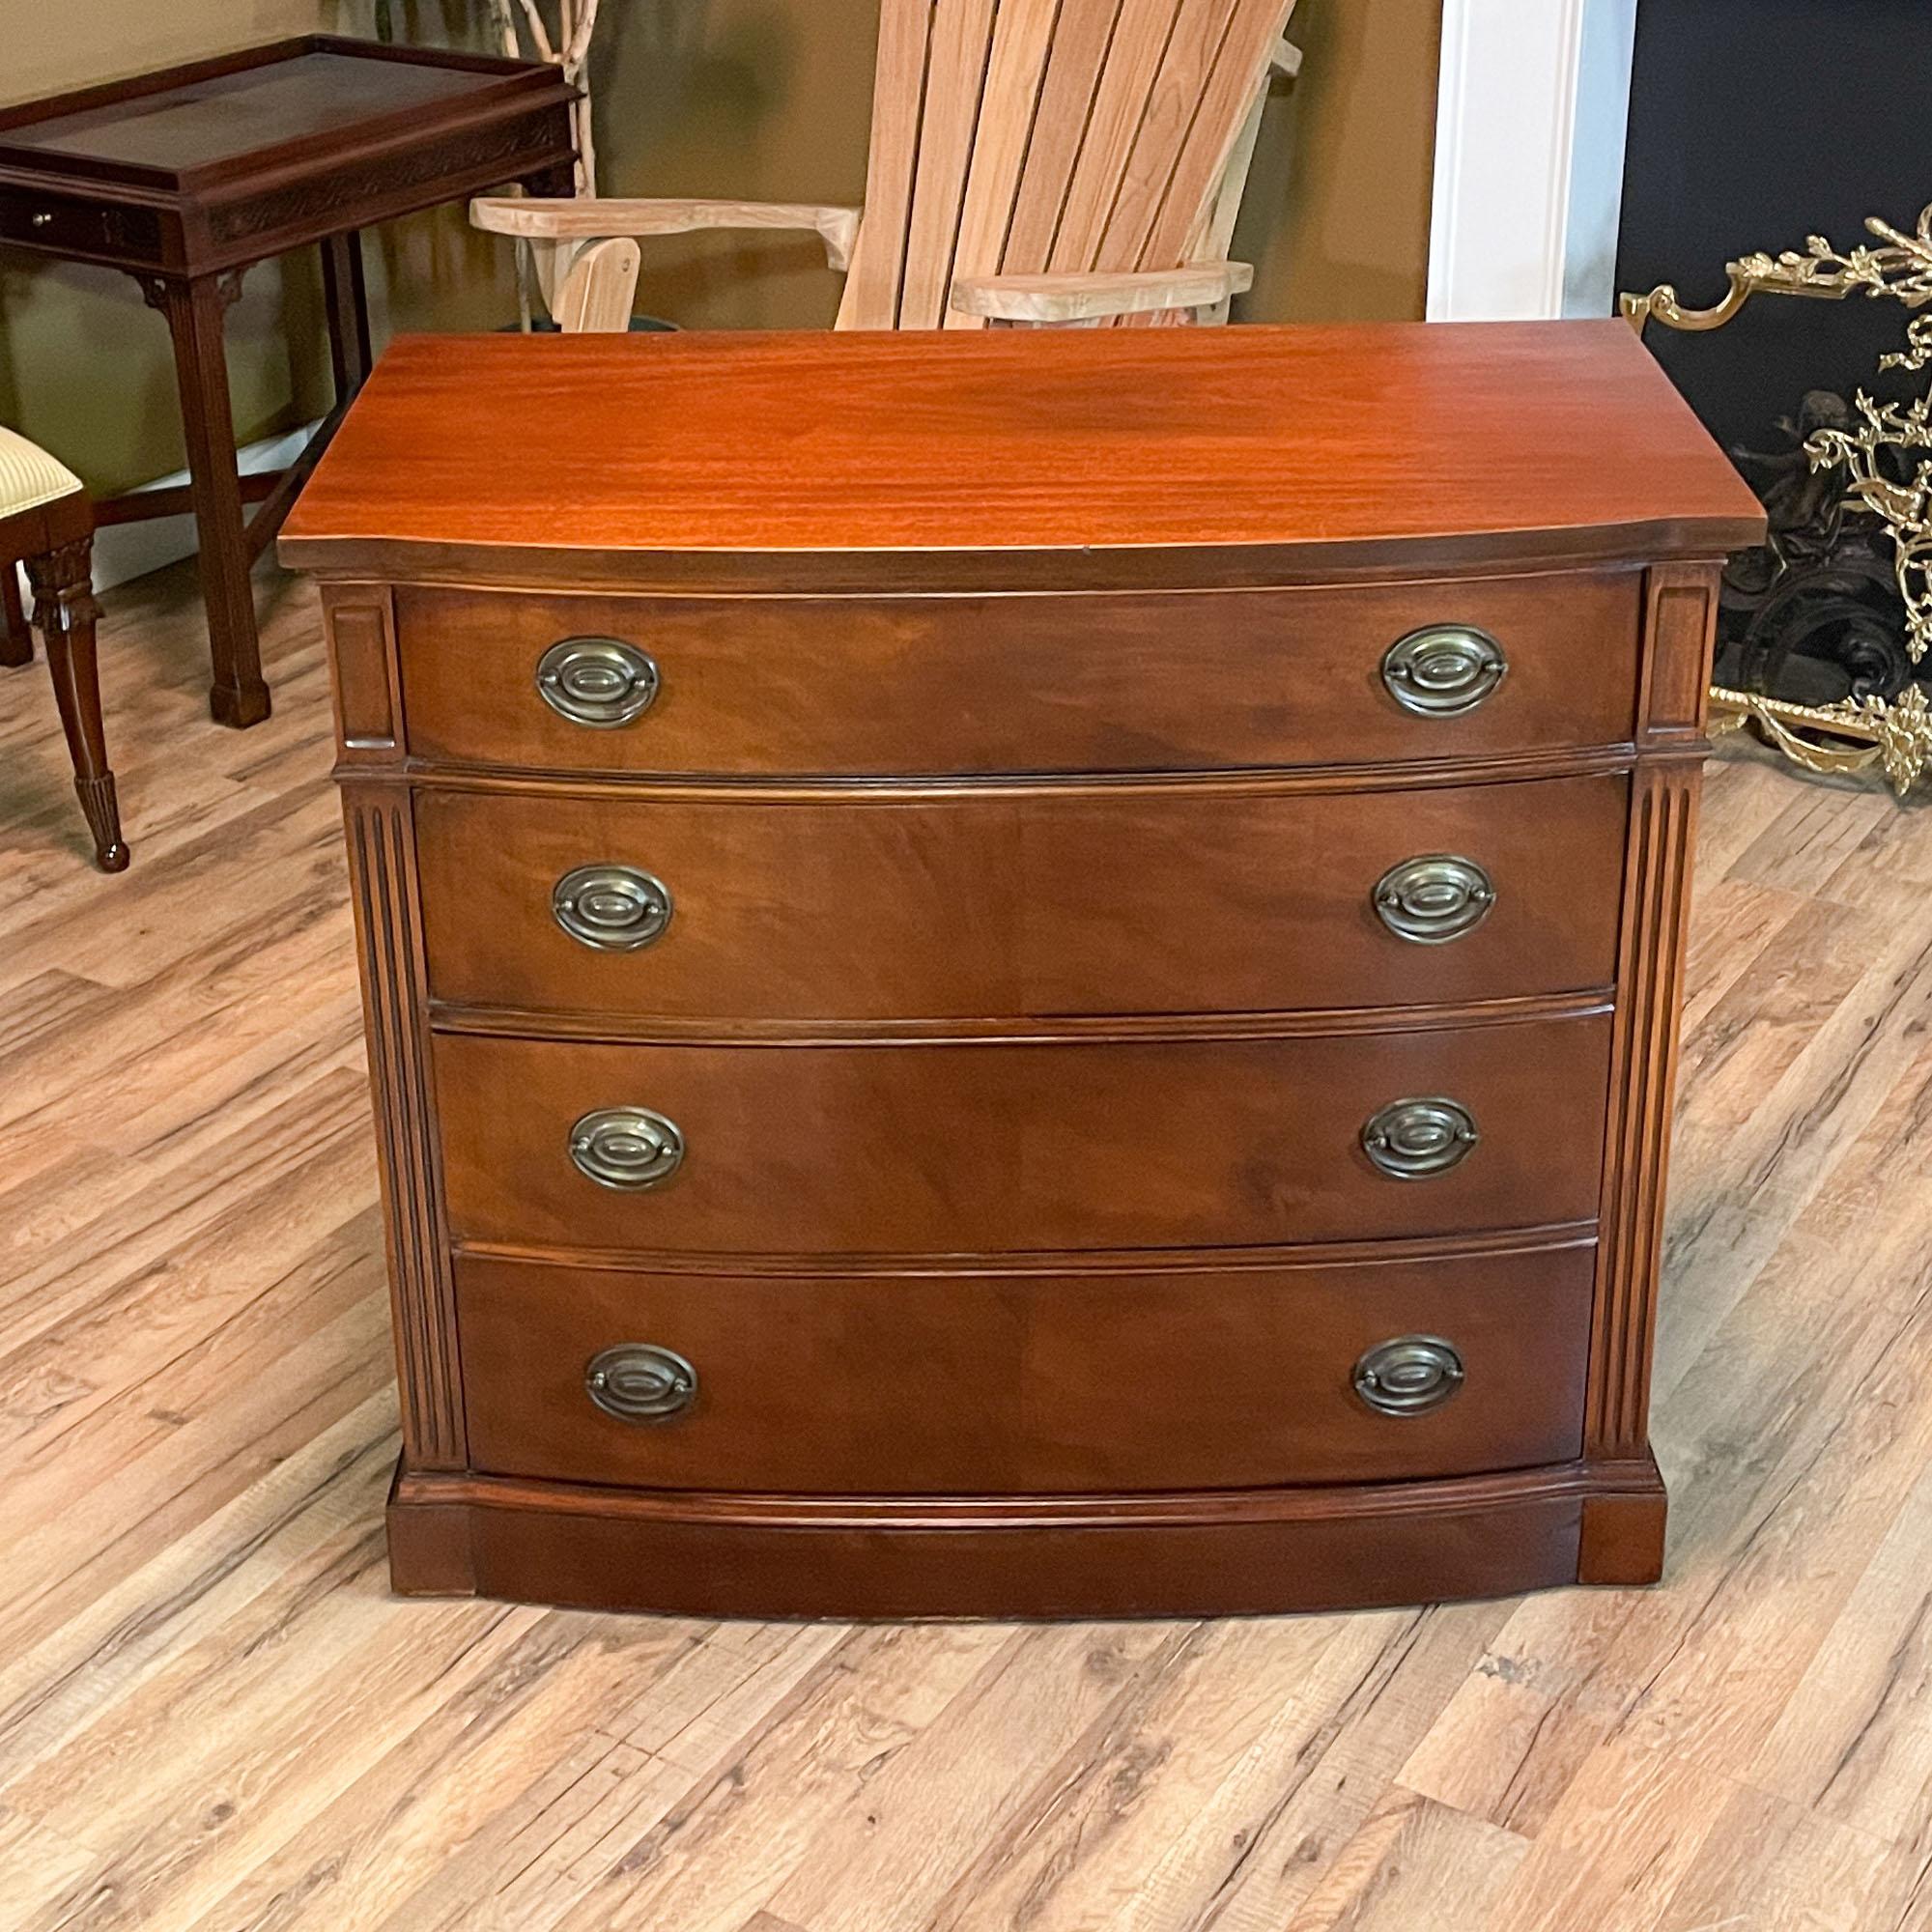 A vintage Vintage Drexel Mahogany Server in superb original condition

Simple yet sophisticated this beautiful Vintage Drexel Mahogany Server has everything going for it. This item boasts a nice amount of storage space featuring four drawers, each